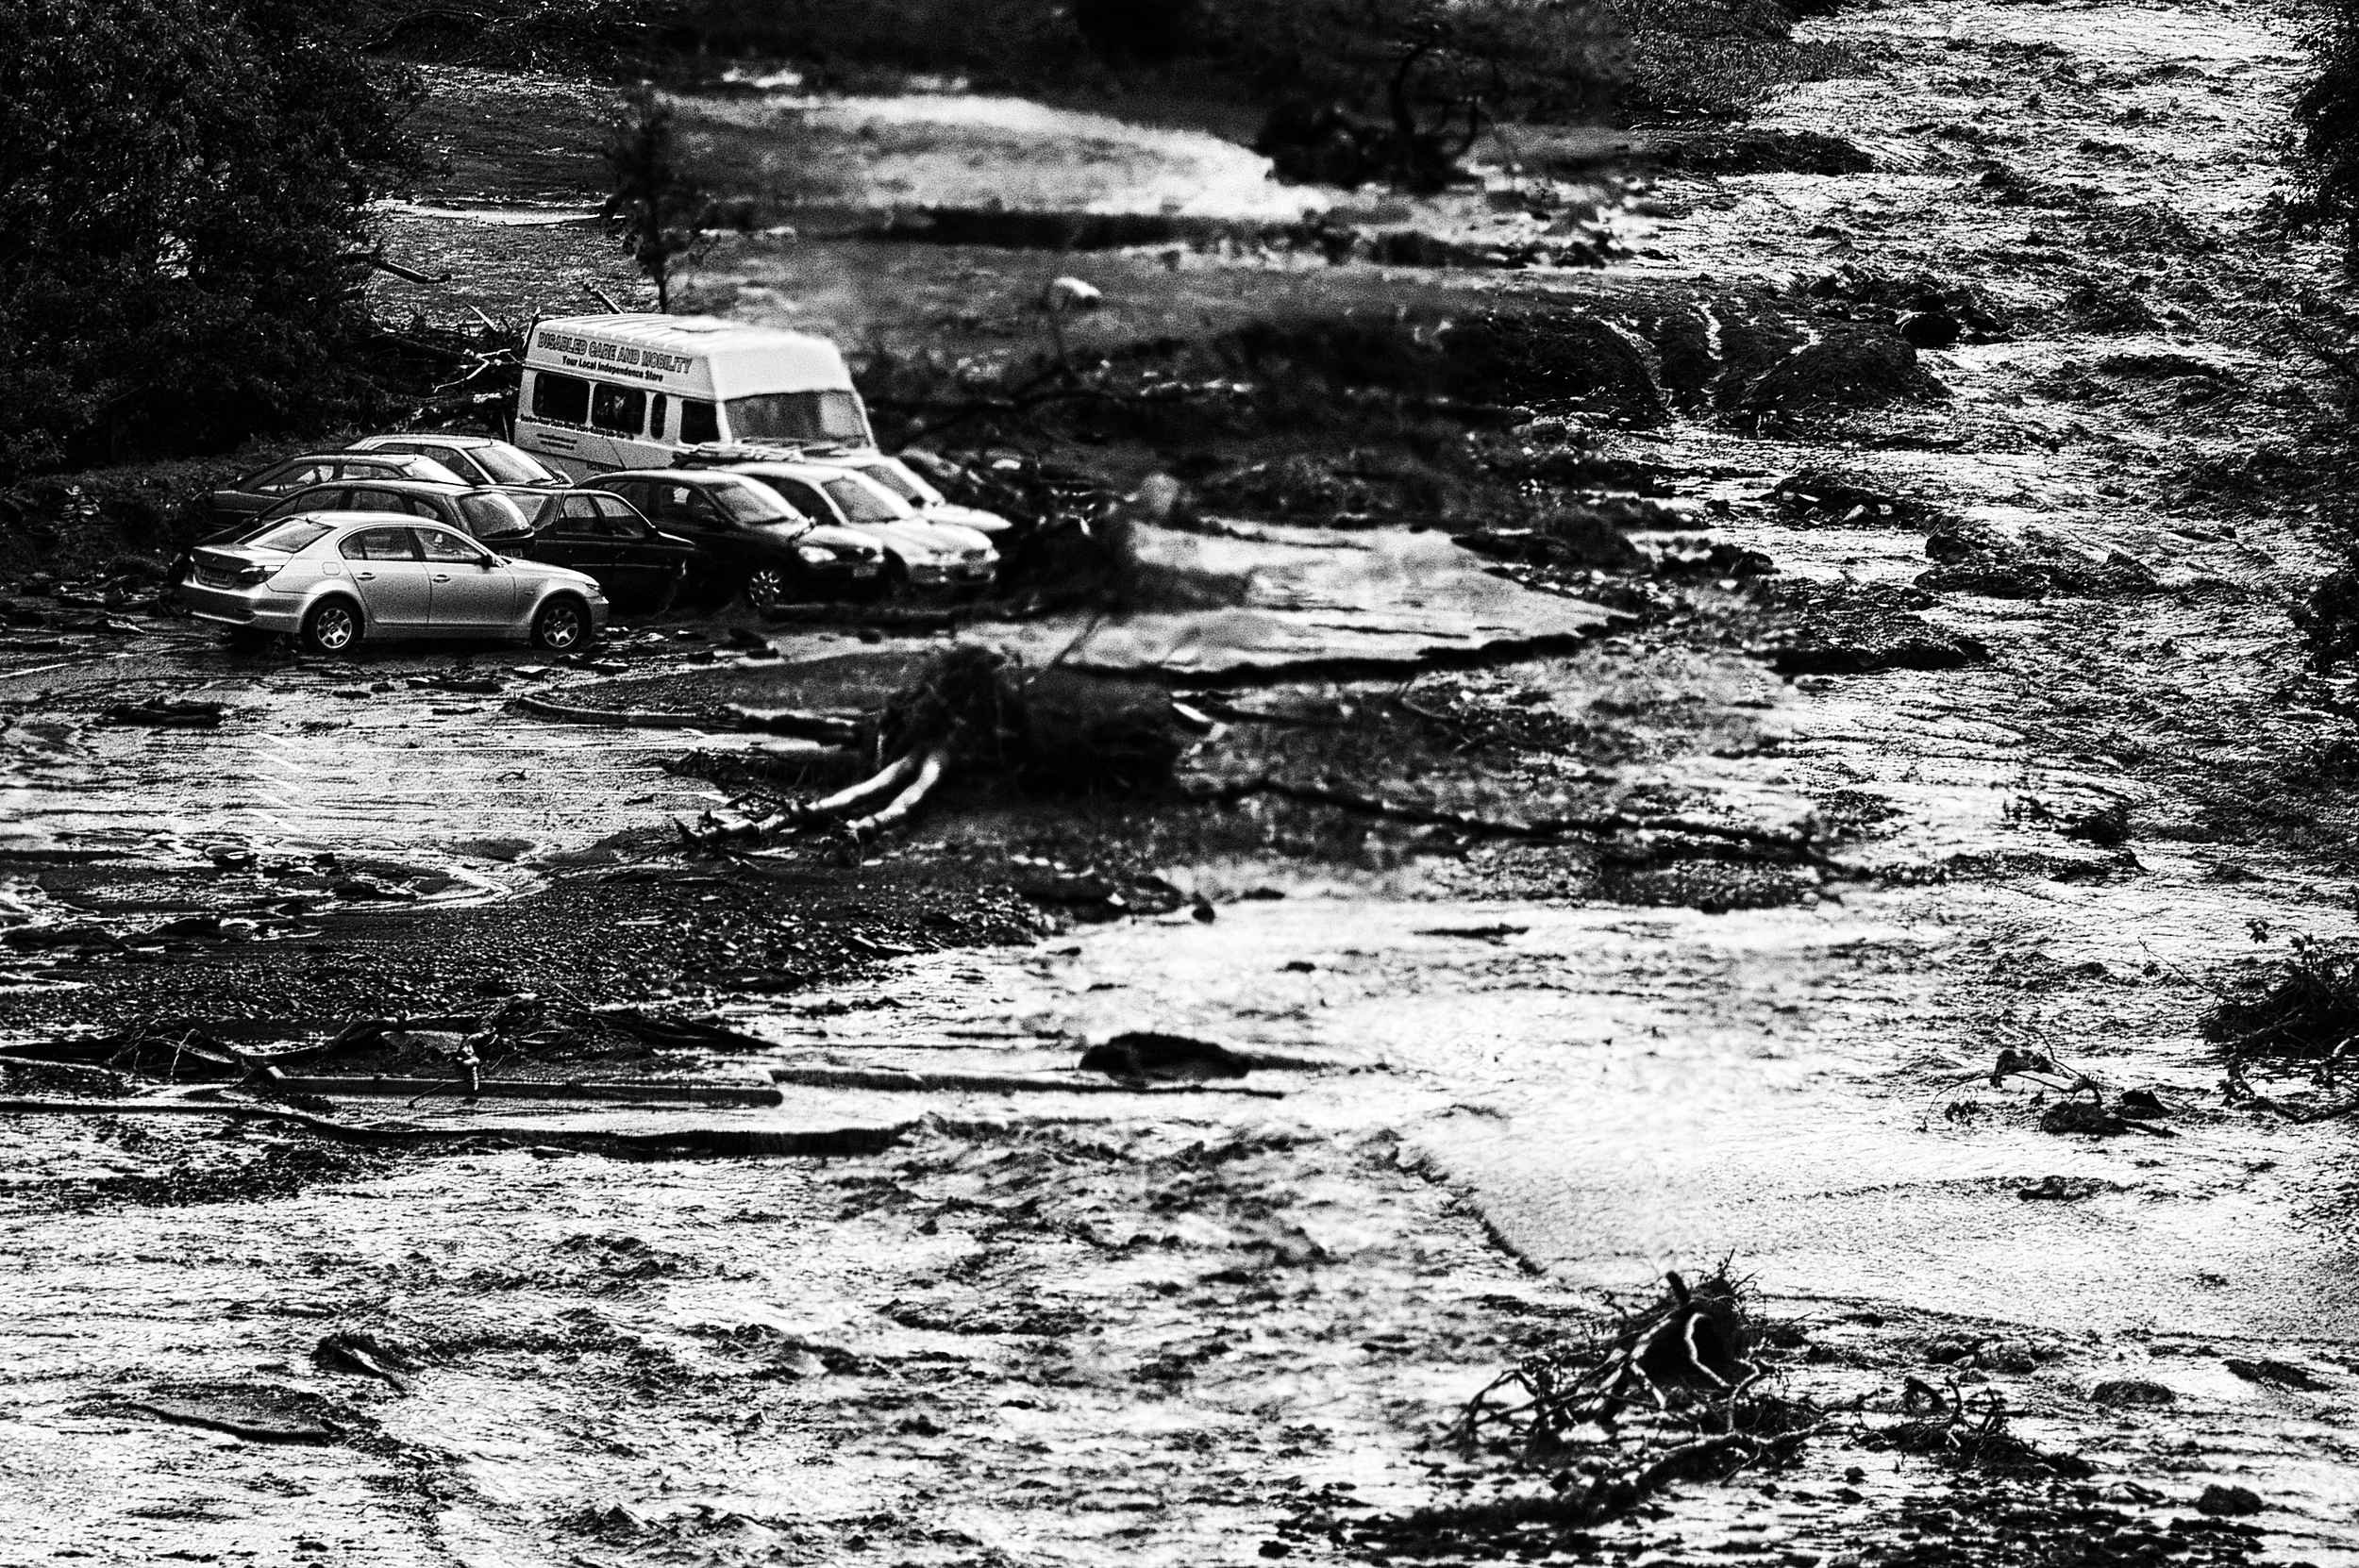   Hundreds of cars washed away with the floods in Boscastle, Cornwall, August 16, 2004. (Photo/Mark Pearson)  